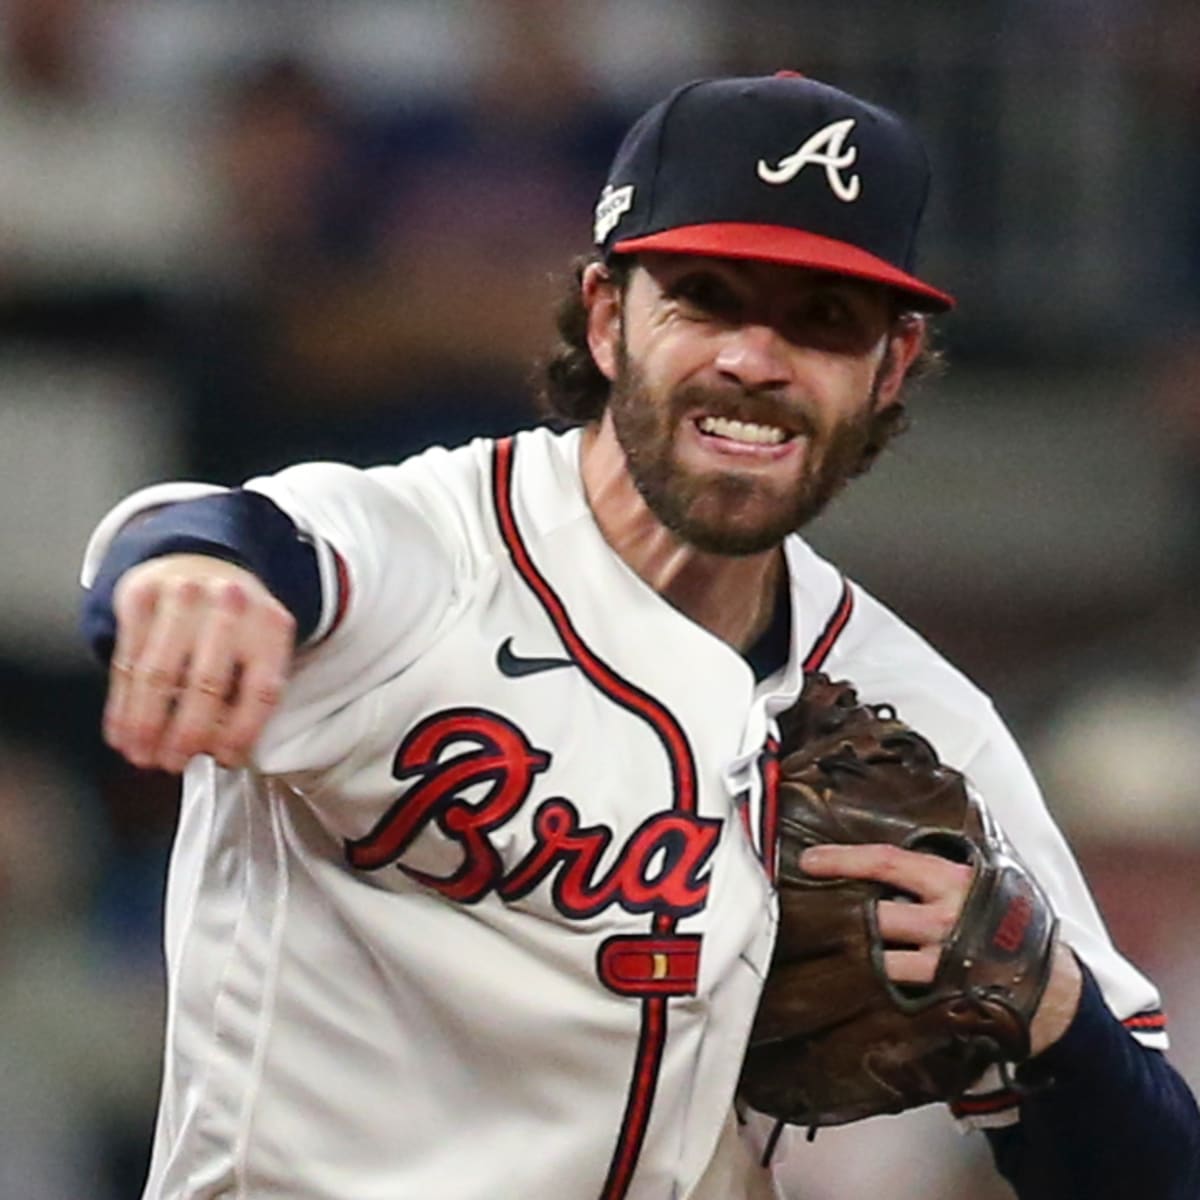 Dansby Swanson Player Props: Cubs vs. Blue Jays